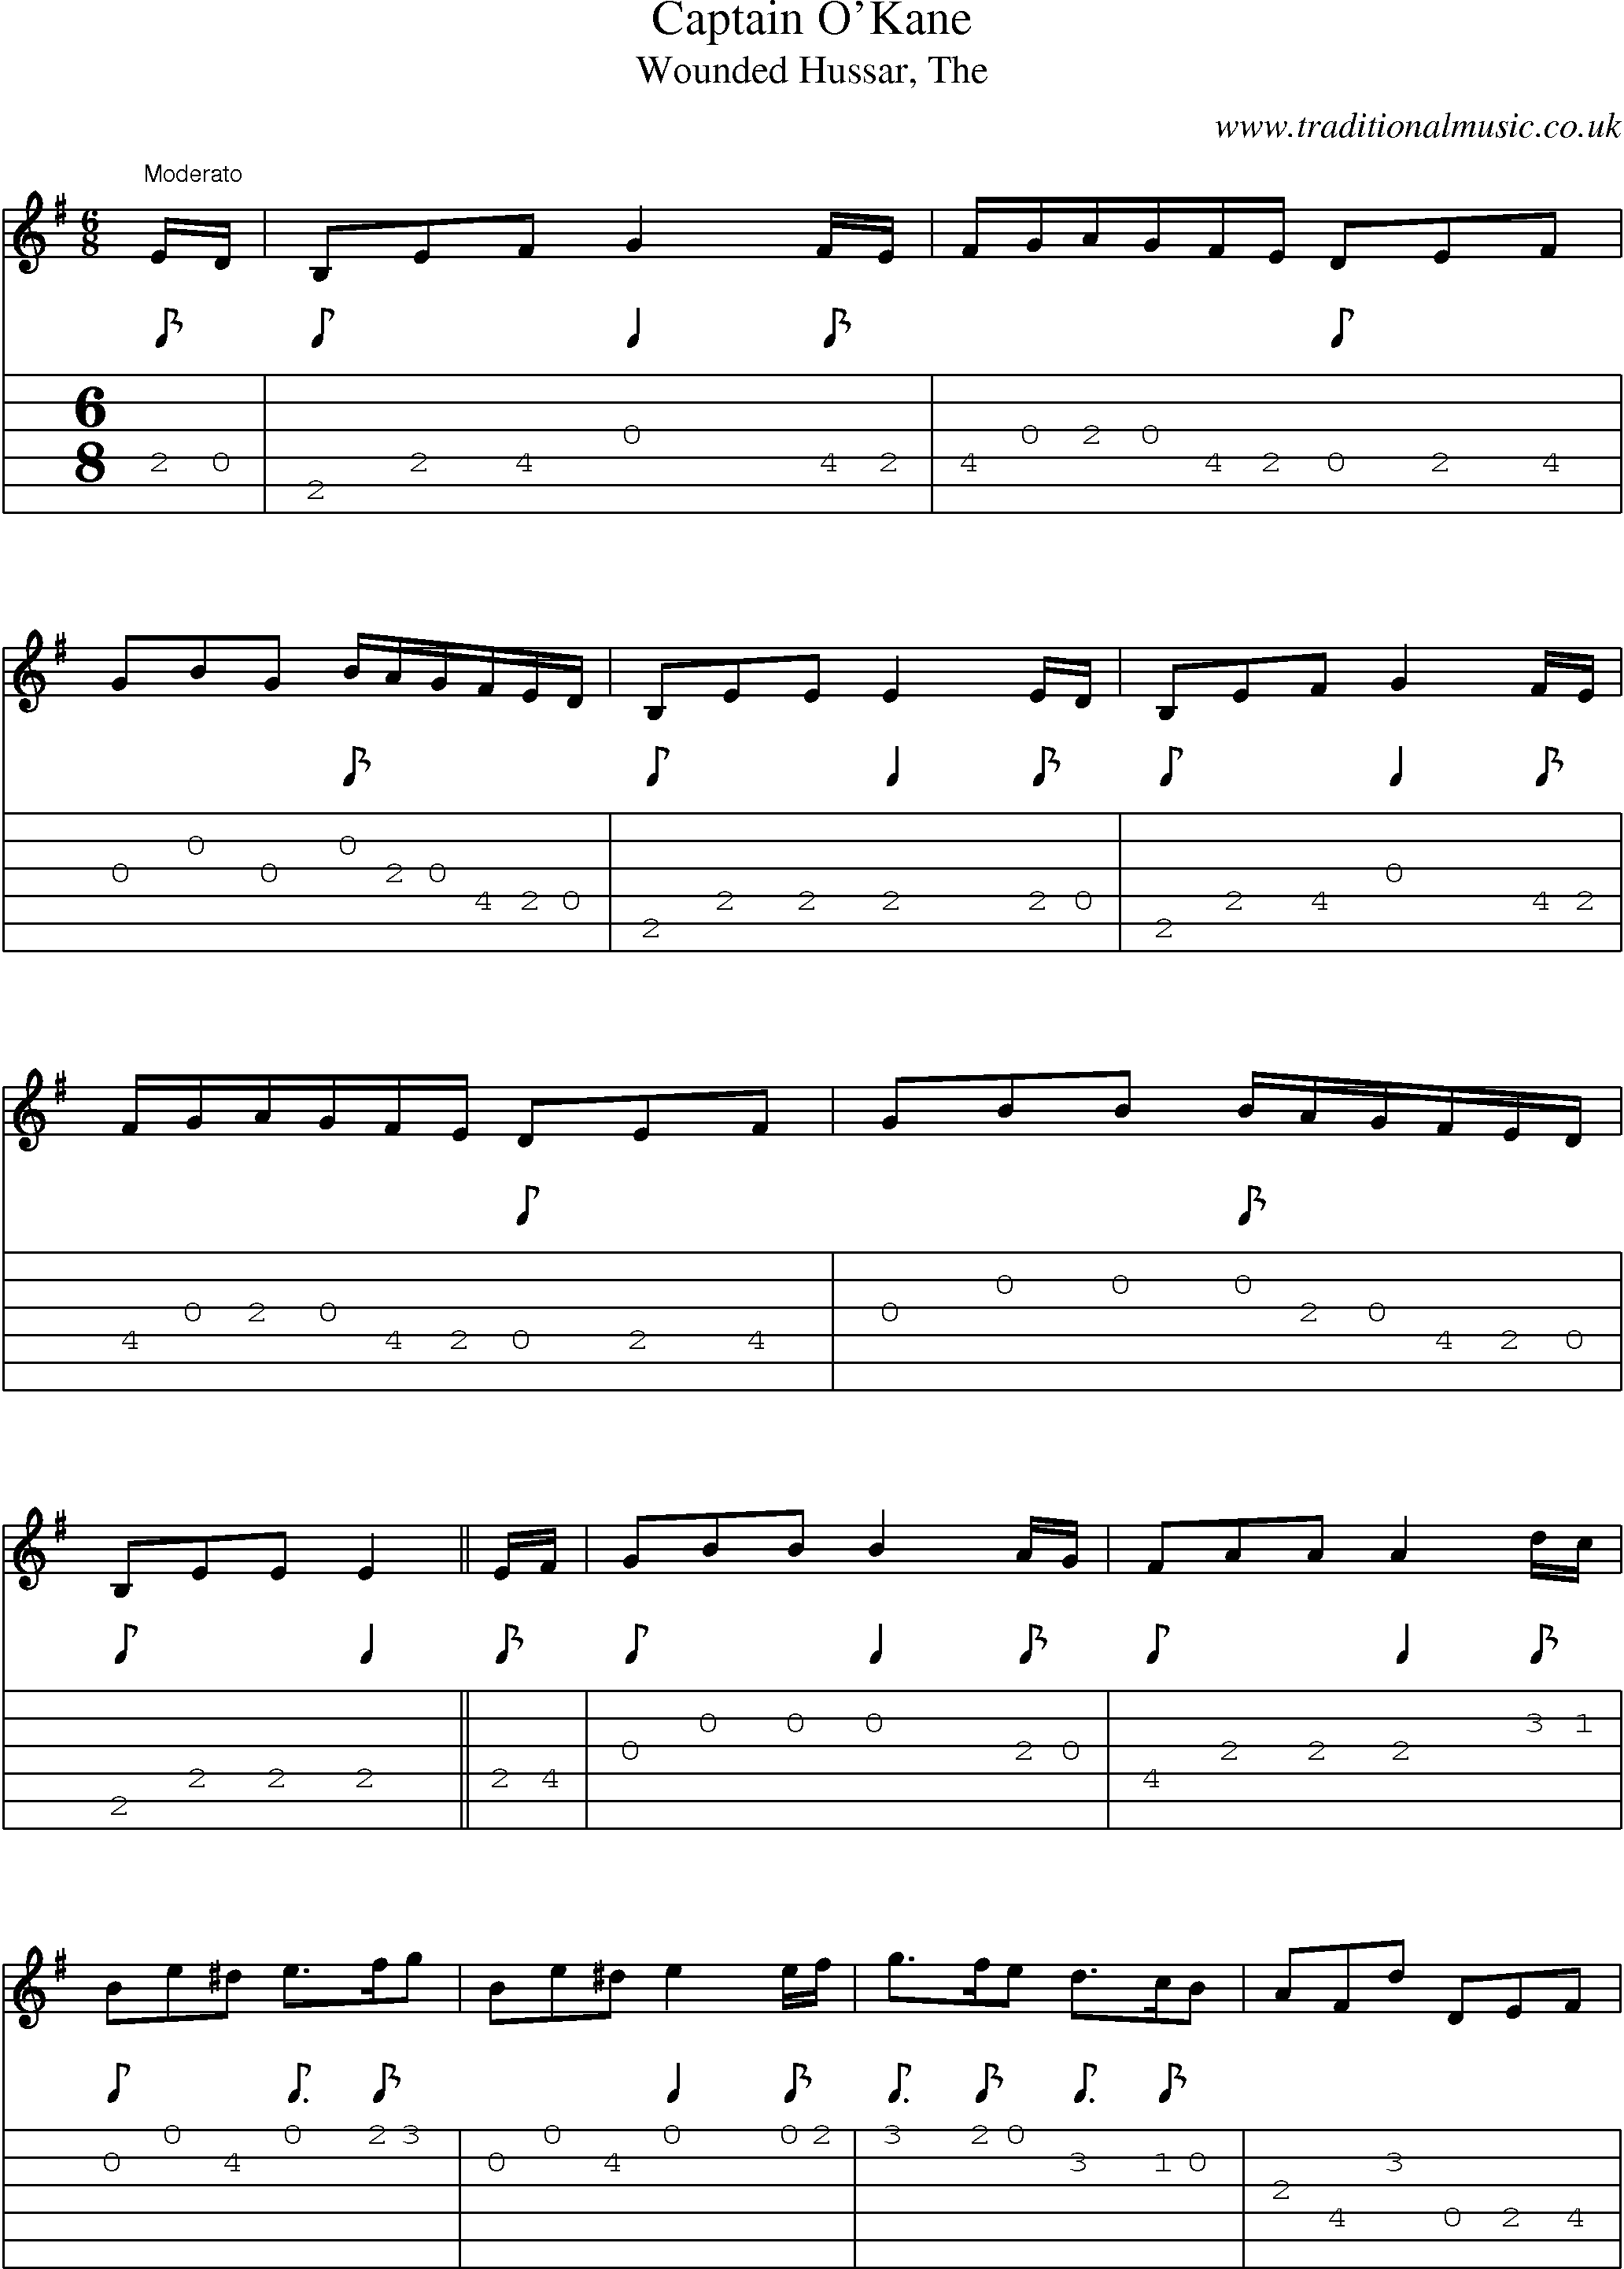 Music Score and Guitar Tabs for Captain Okane